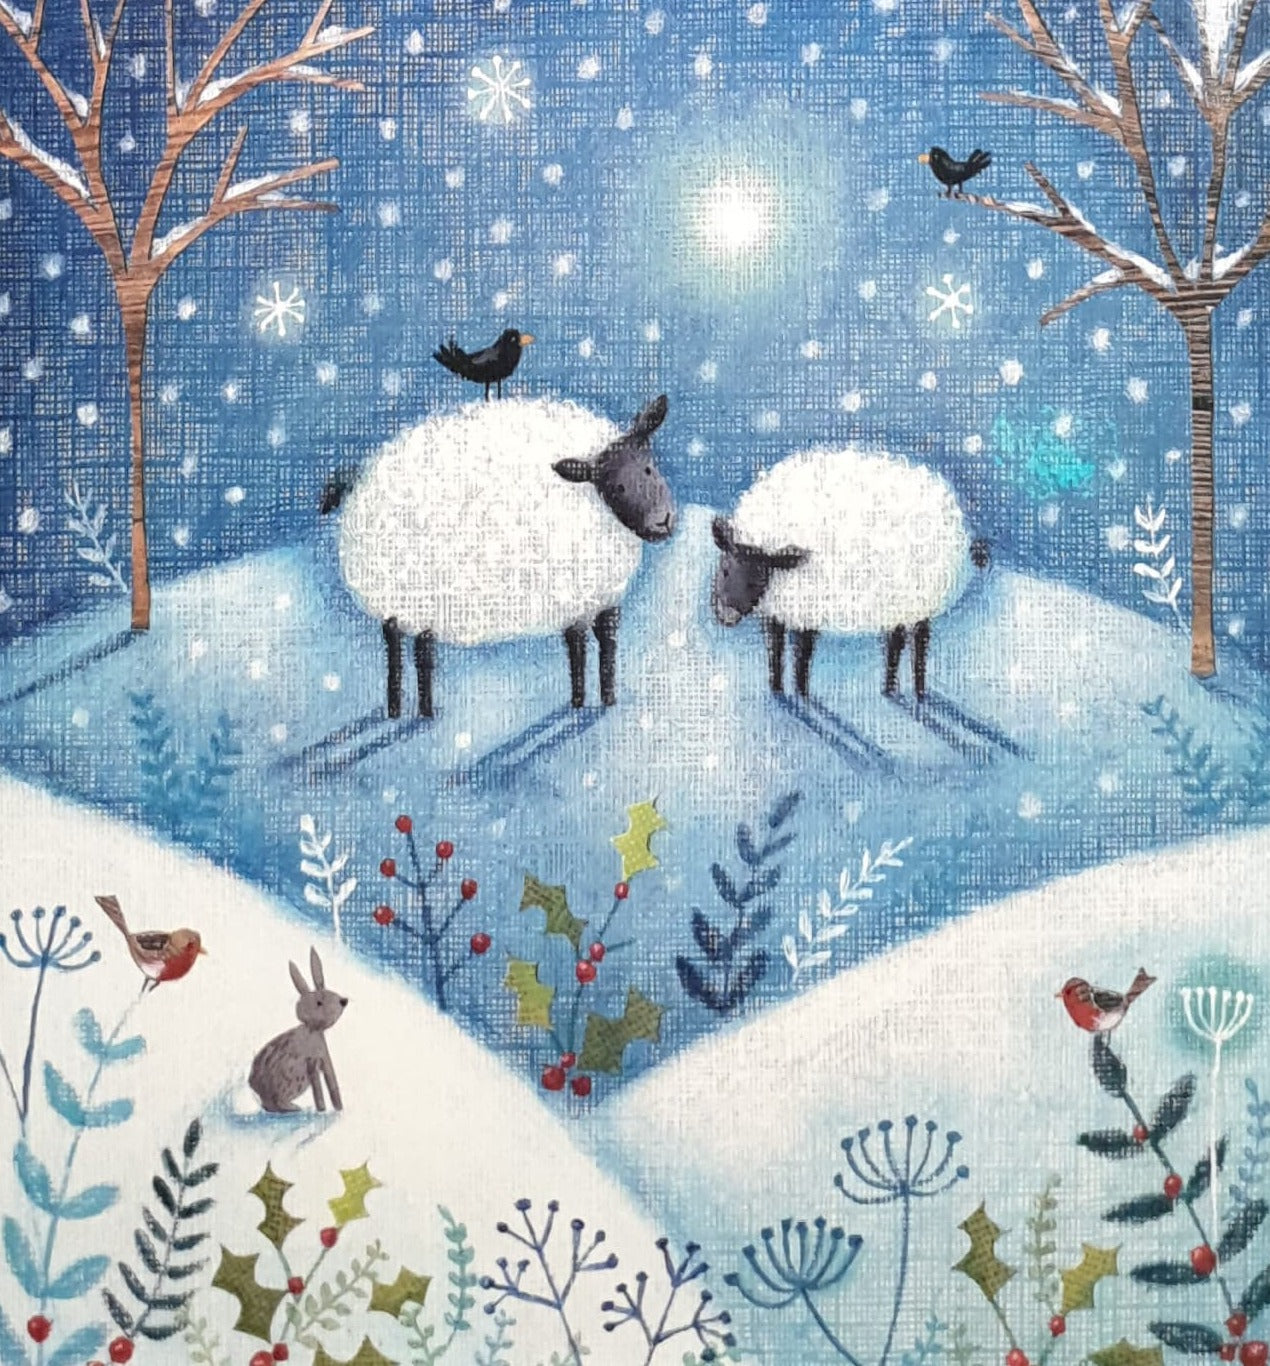 Charity Christmas Cards - Pack of 8 / Down Syndrome Ireland - Sheep on Snowy Hills